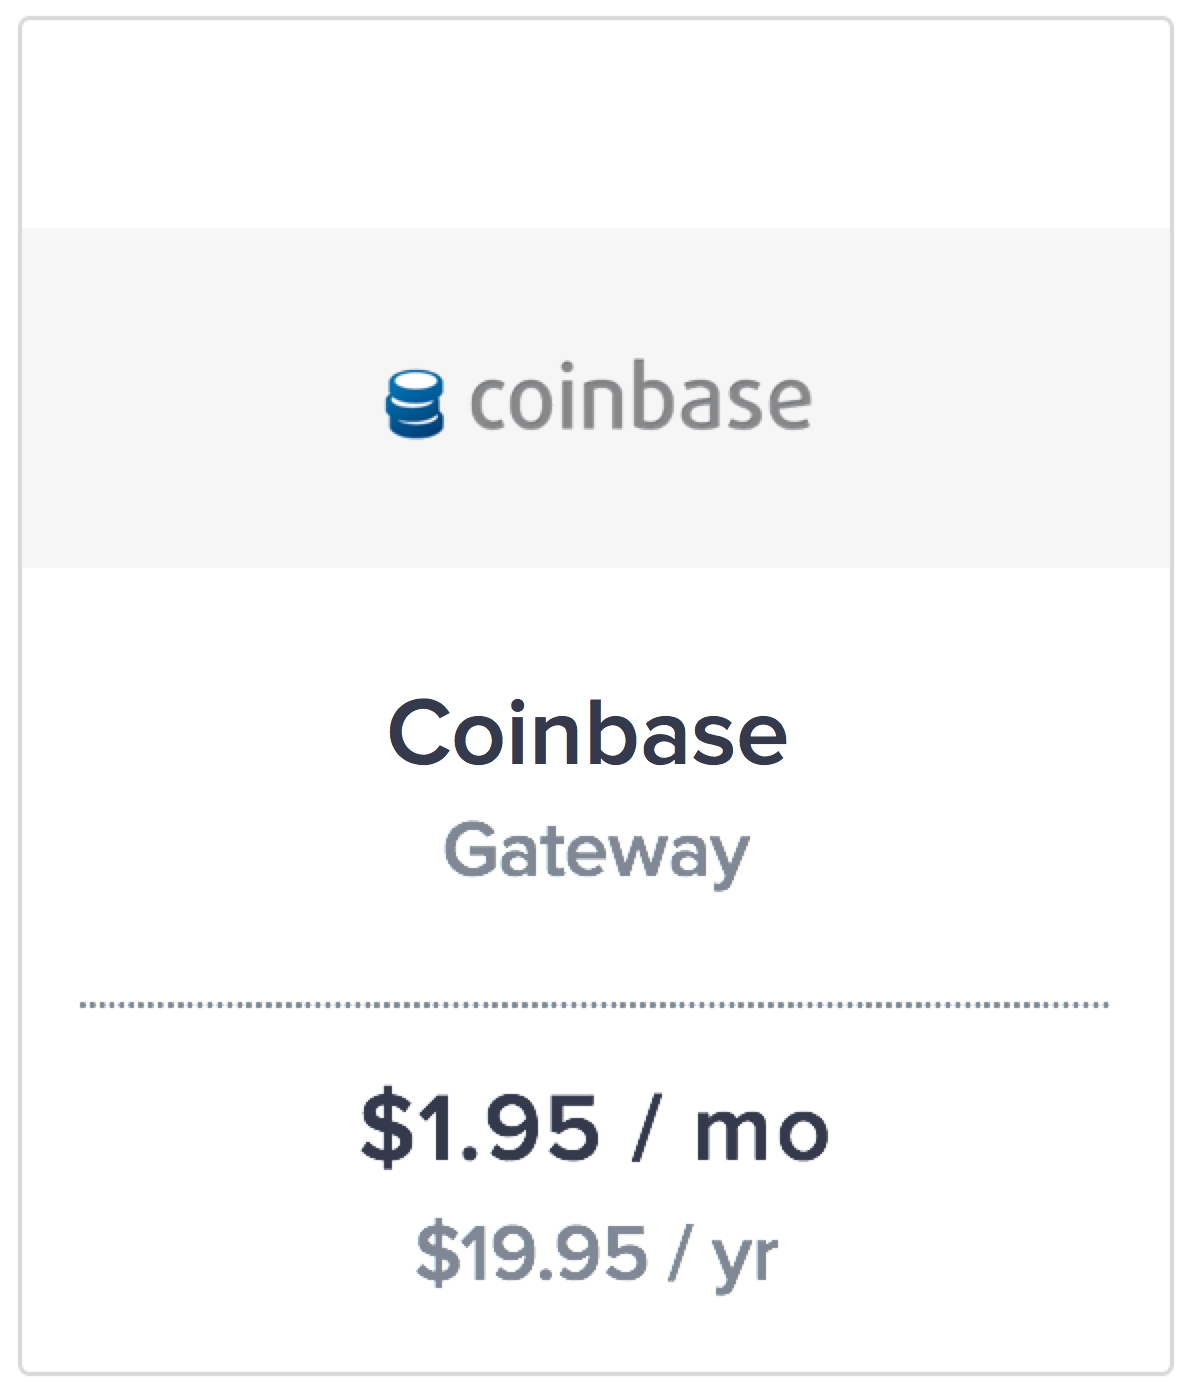 Accept Bitcoin Payments with Coinbase